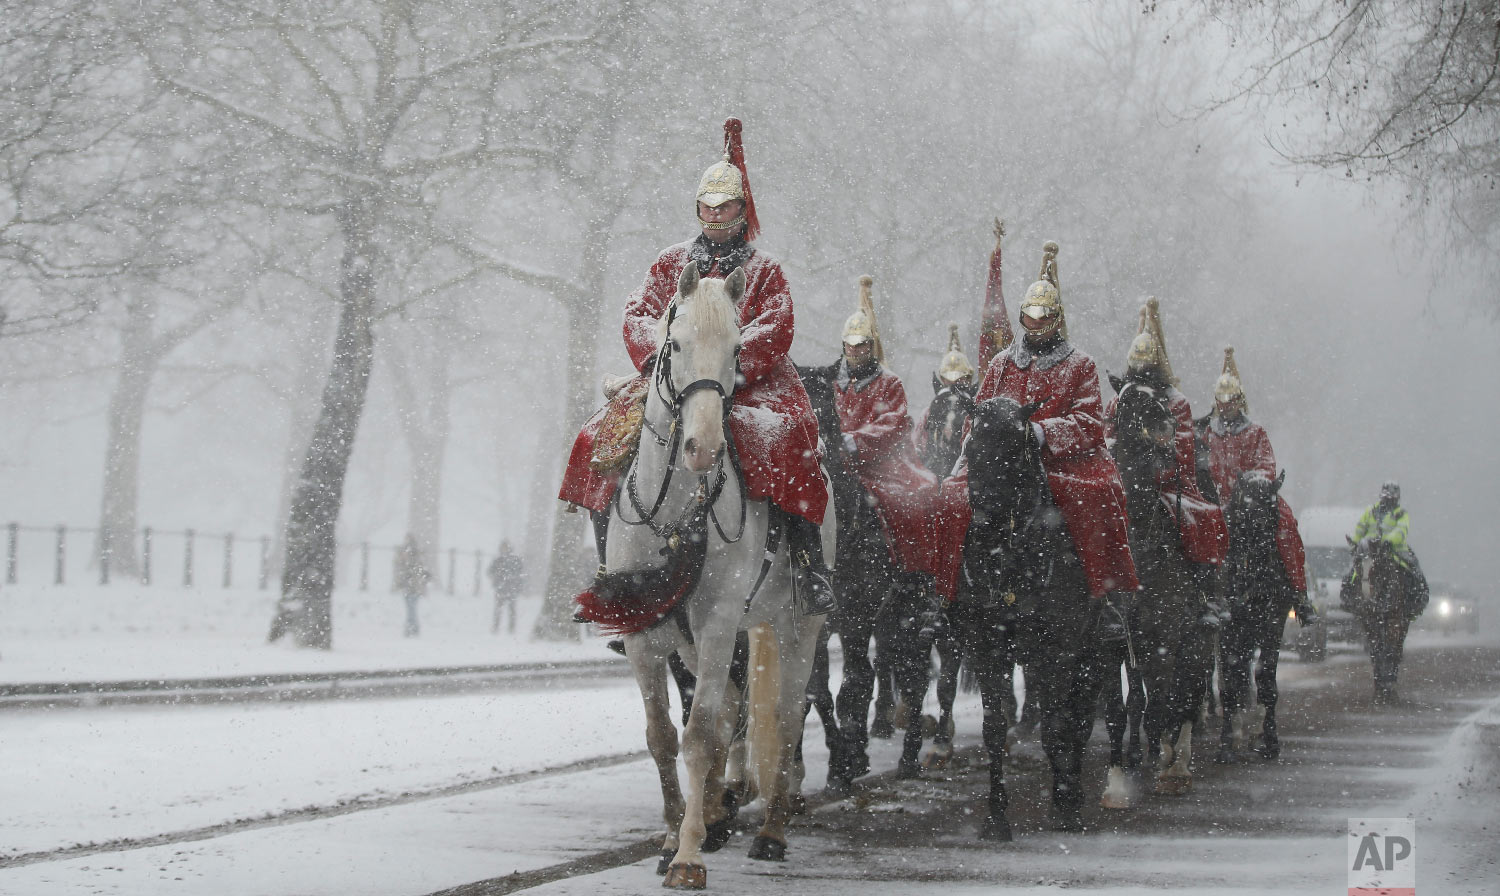  Members of the Household Cavalry return to their barracks as snow falls in London. Britain, which is buffered by the Atlantic Ocean and tends to have temperate winters, saw heavy snow in some areas that disrupted road, rail and air travel and forced